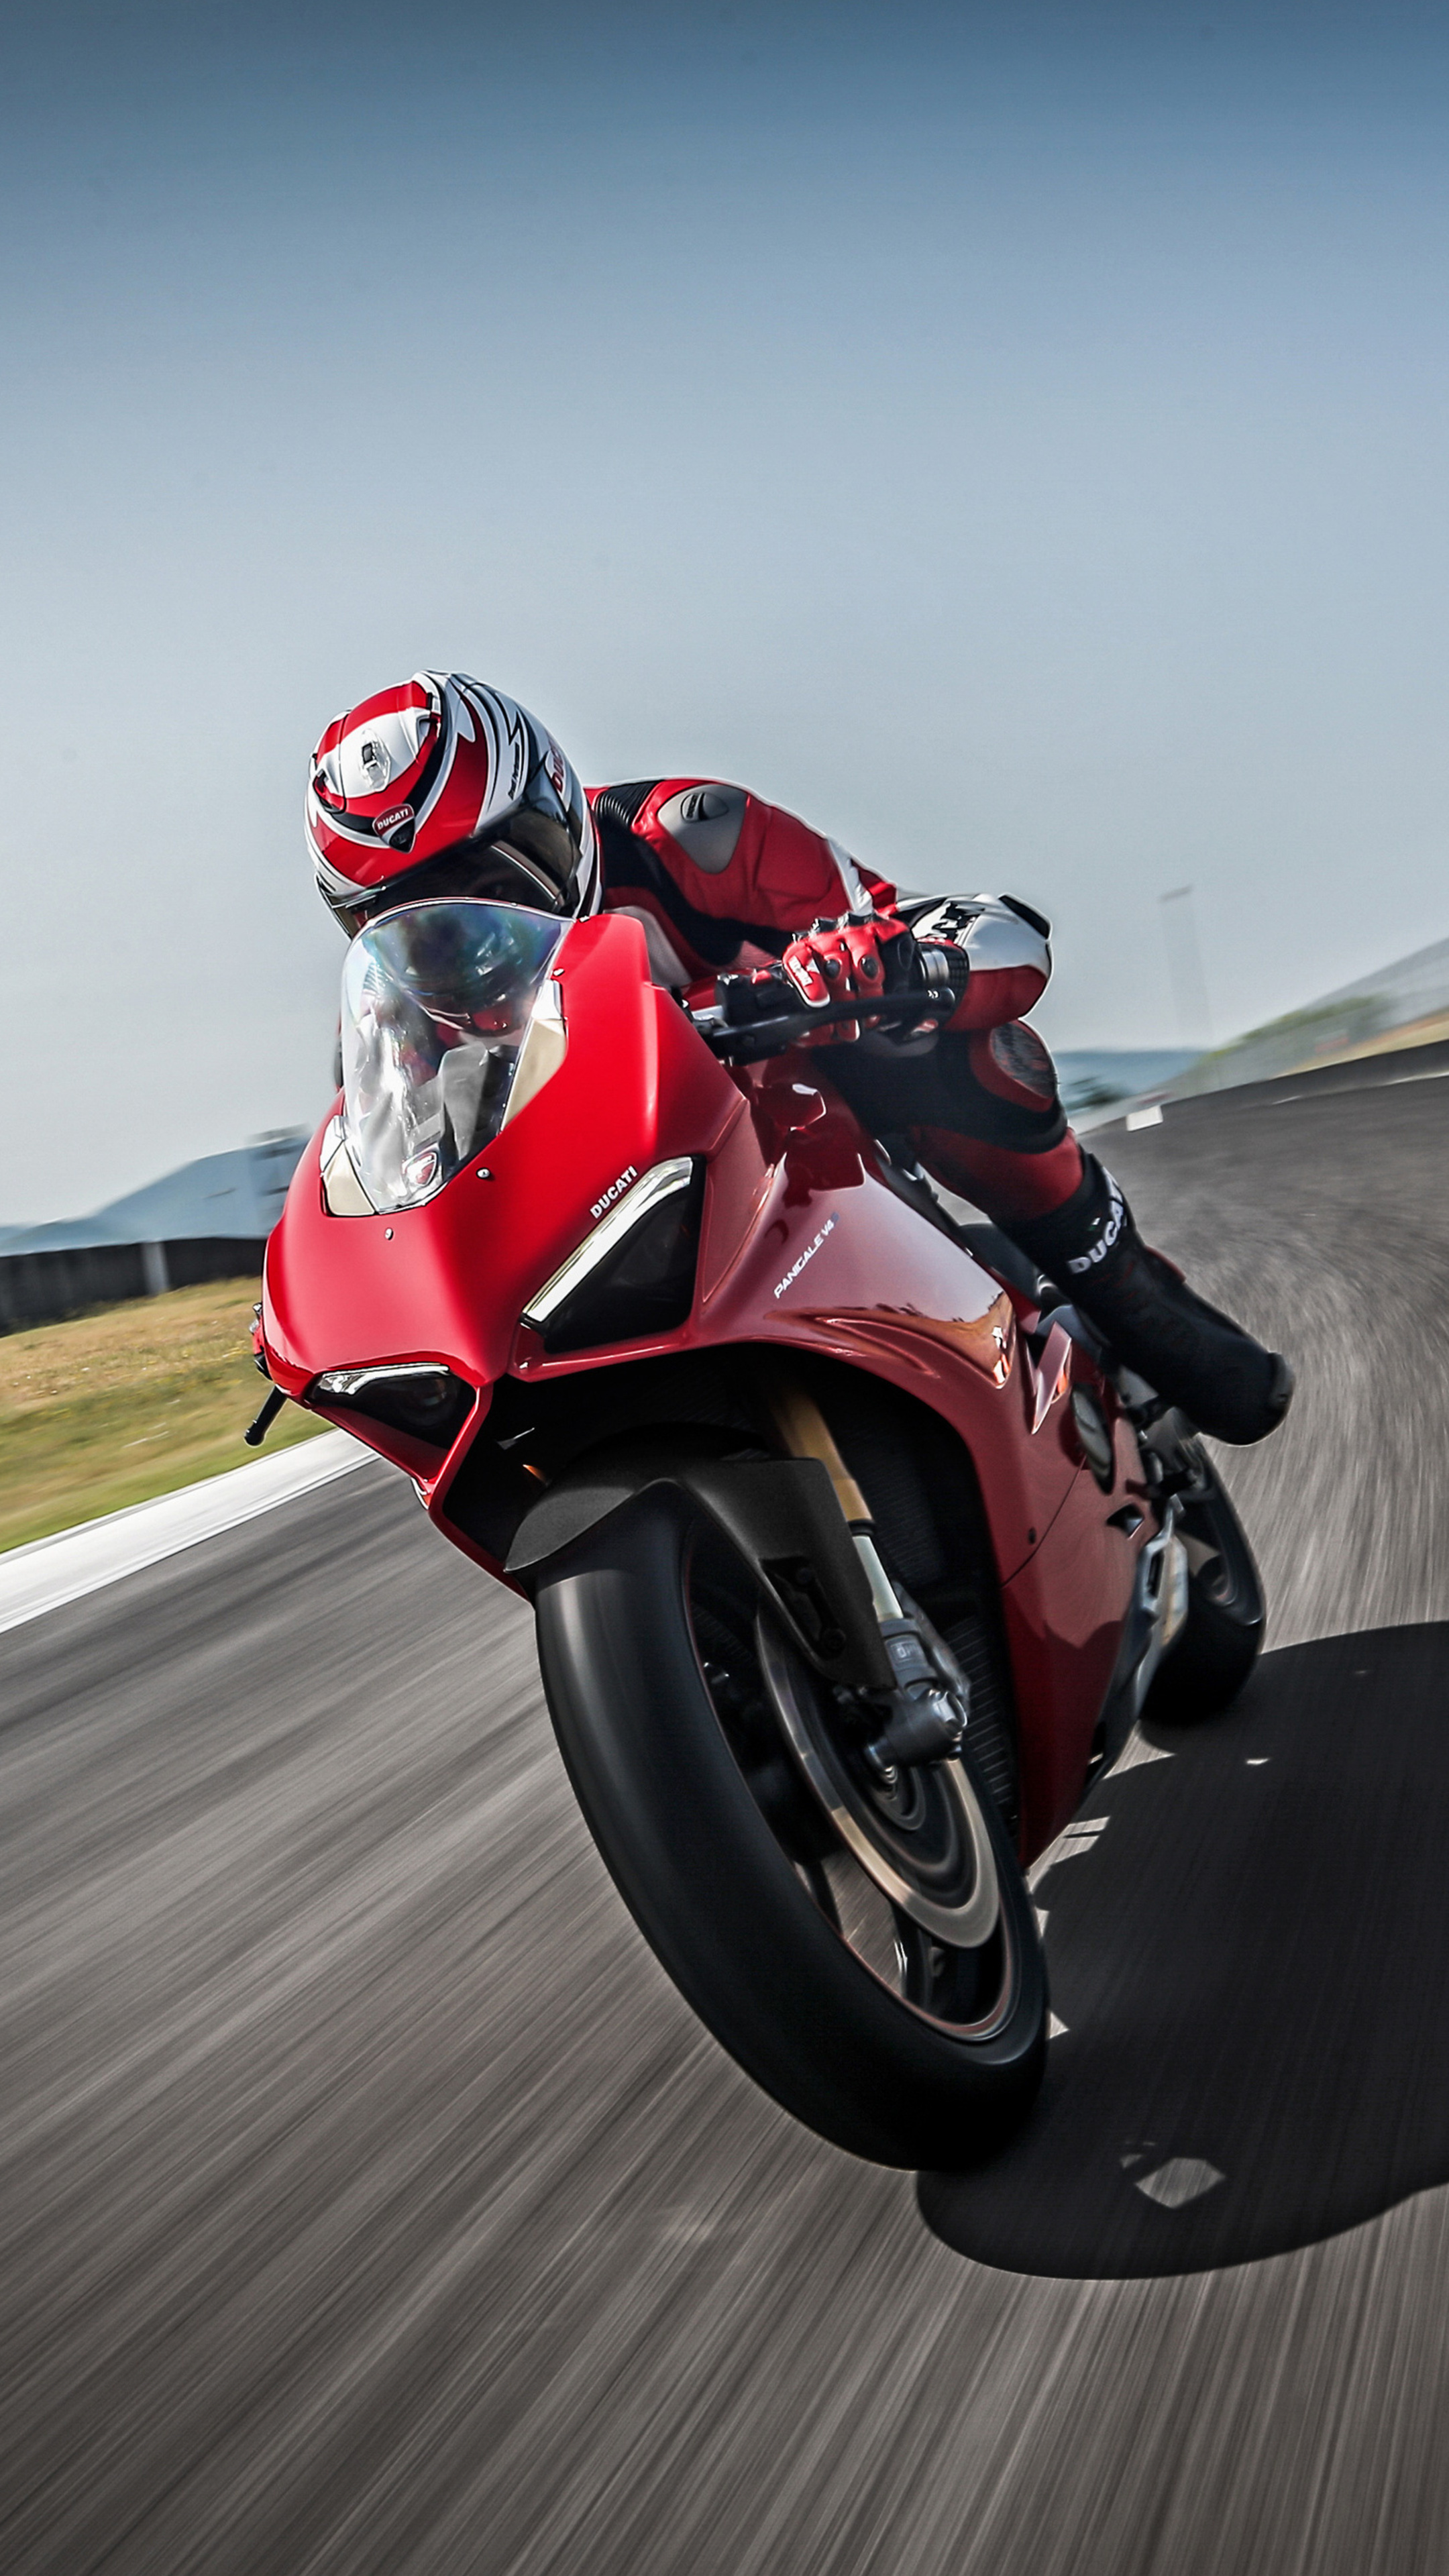 Motorcycle Racing: Ducati Panigale V4, 2018, High Speed, Motorcyclist. 2160x3840 4K Wallpaper.